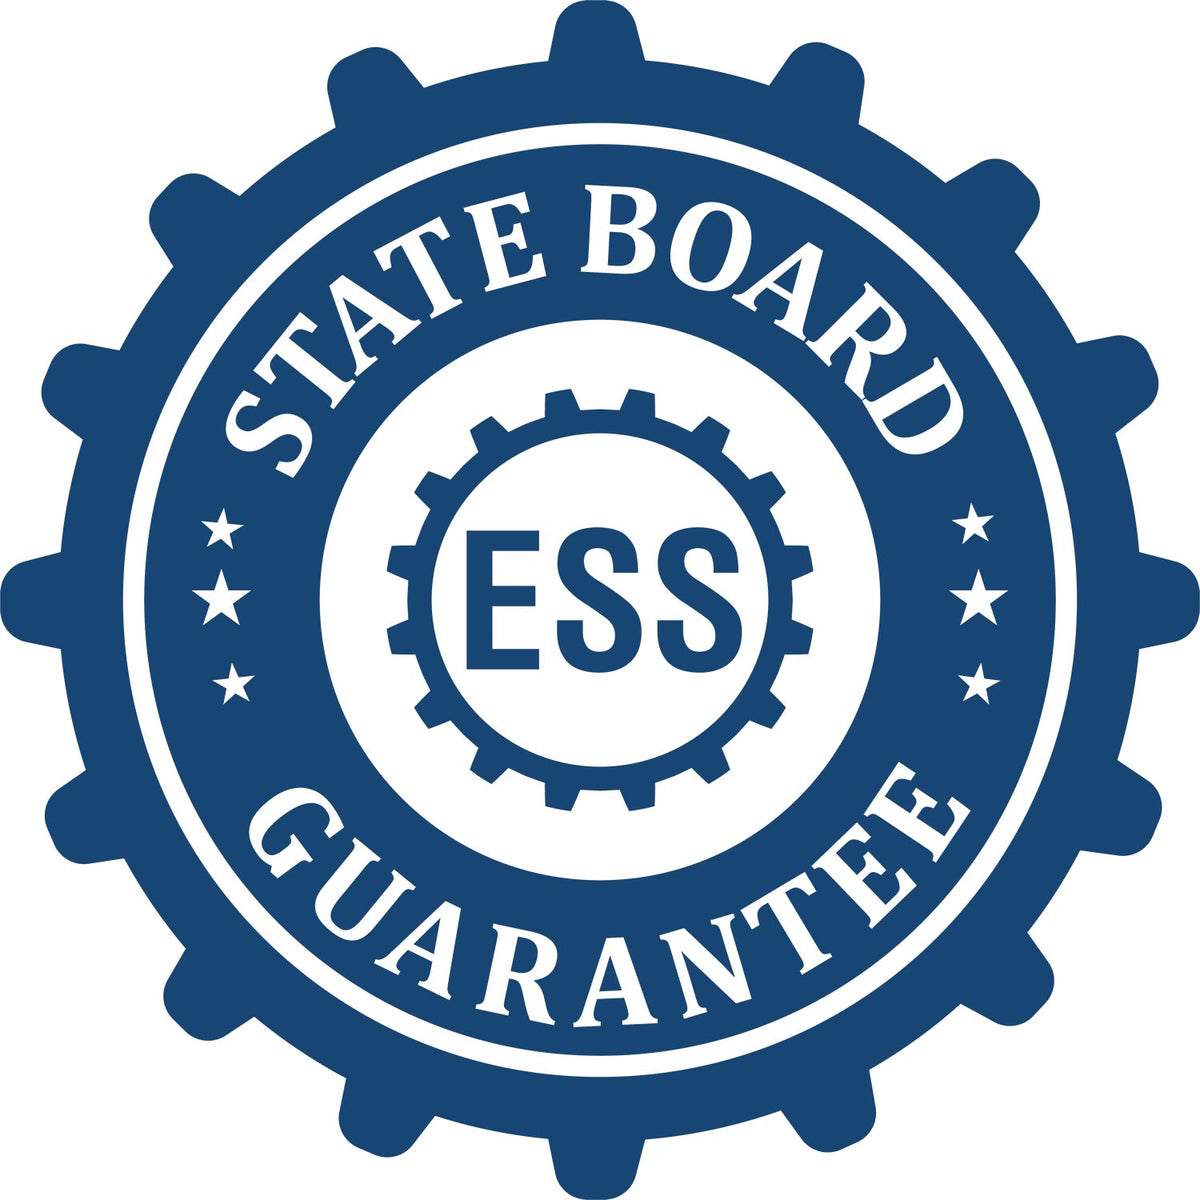 An emblem in a gear shape illustrating a state board guarantee for the Handheld Illinois Professional Geologist Embosser